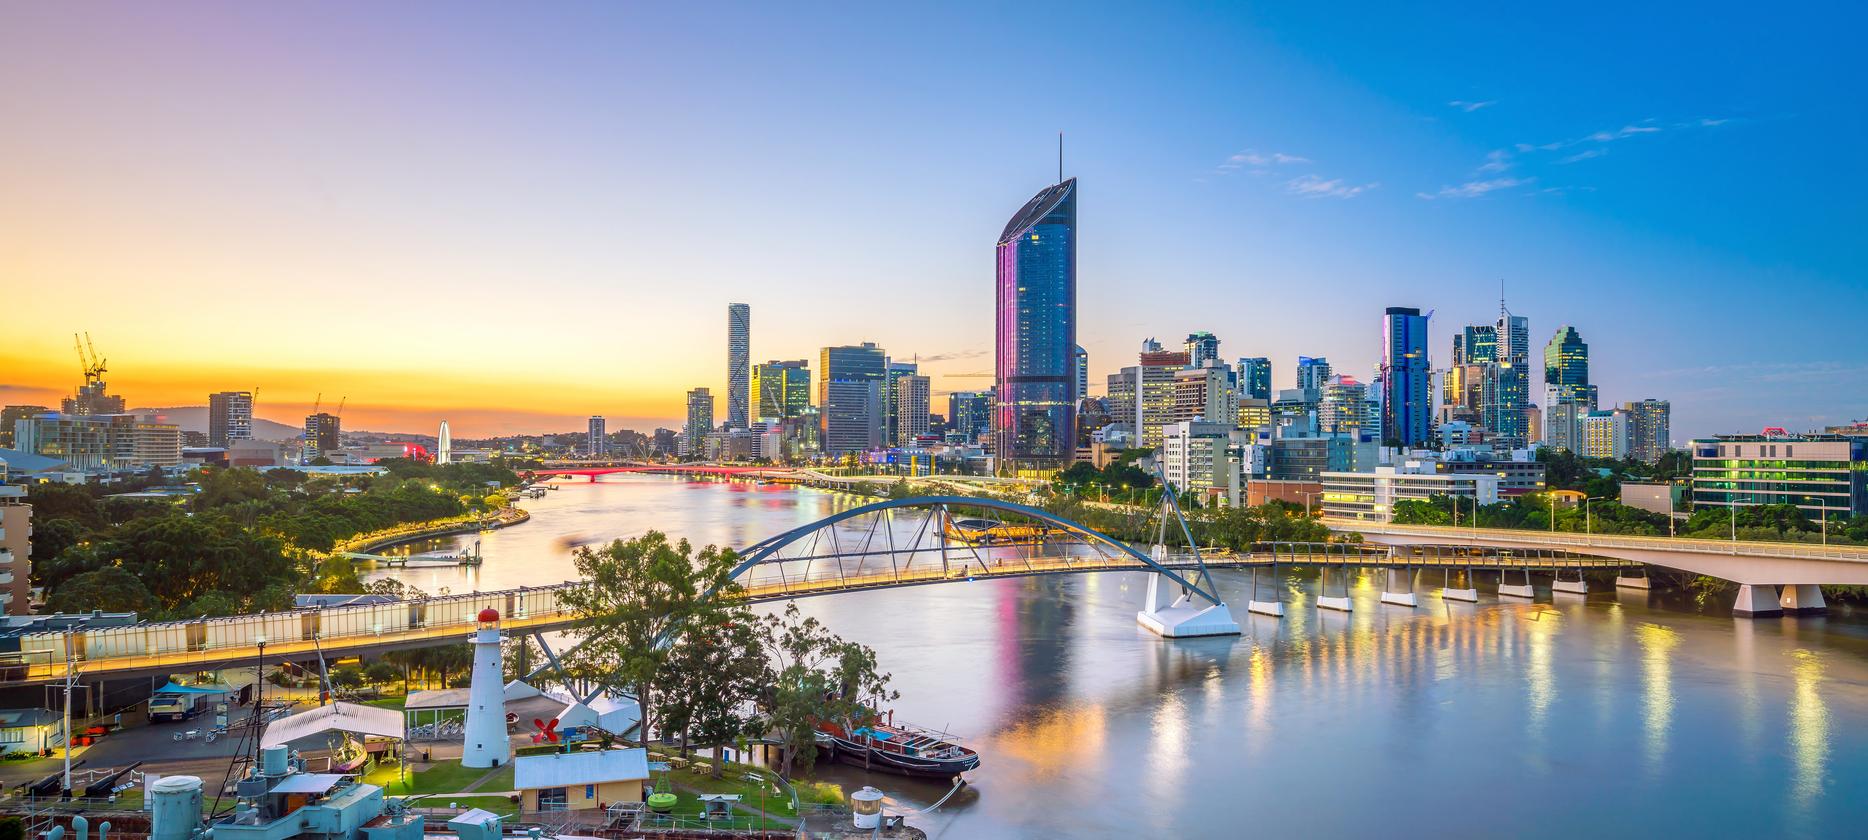 The median dwelling value in Brisbane just overtook Melbourne. Here’s why.